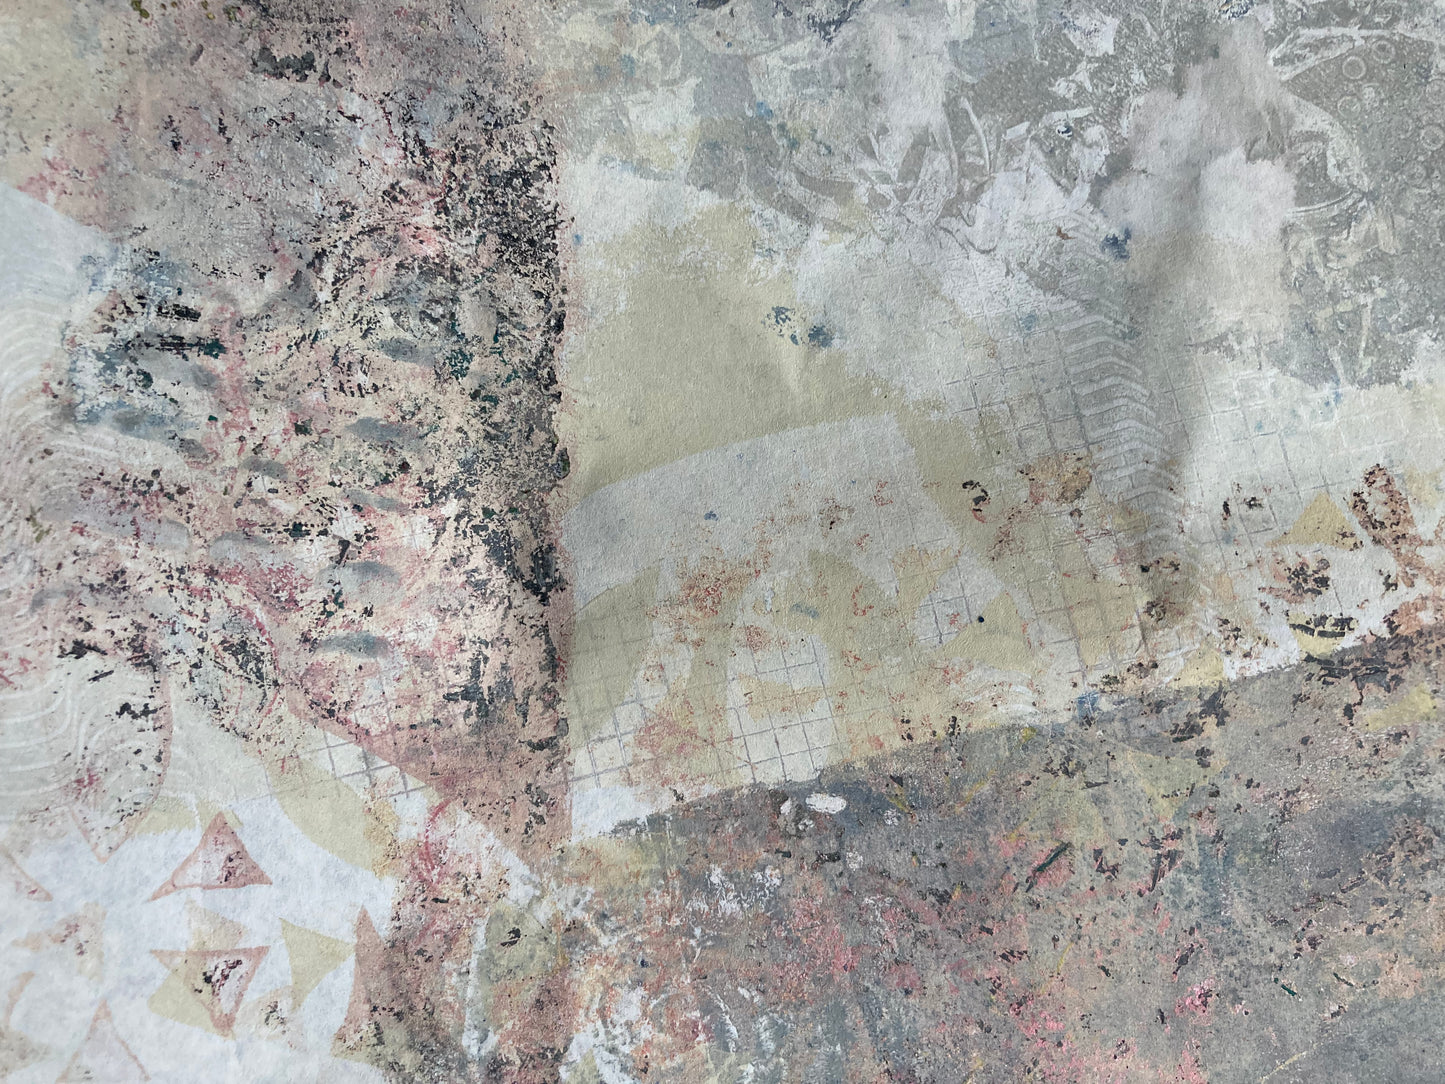 Painted Paper Bundles for Mixed Media Collage | "Silvery Dawn" |